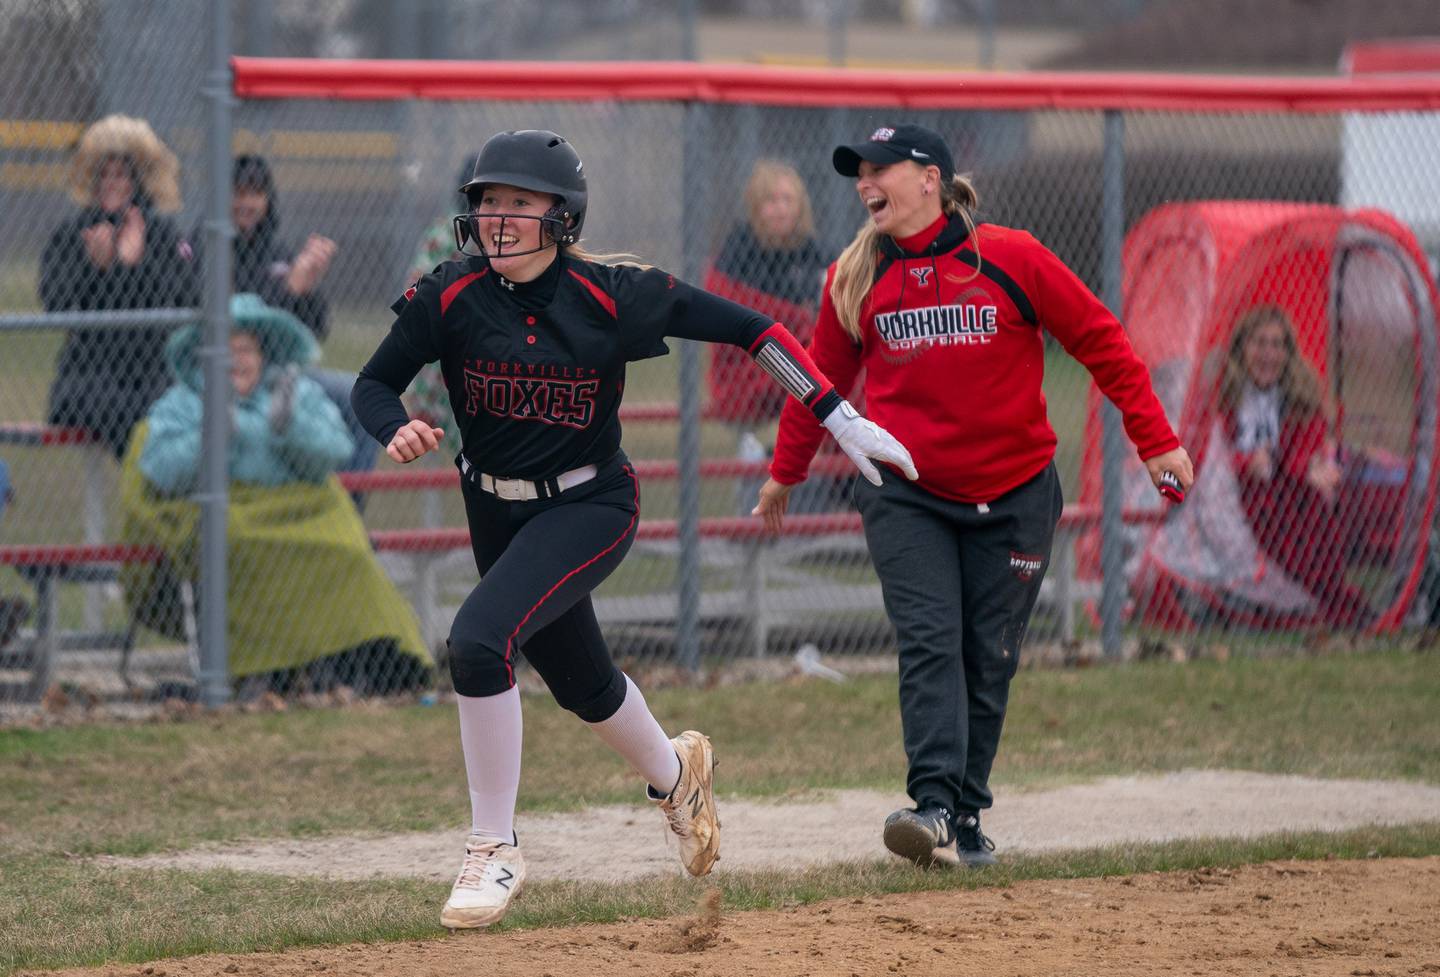 Yorkville's Madi Reeves (2) rounds third after homering against Neuqua Valley during a softball game at Yorkville High School on Wednesday, April 6, 2022.